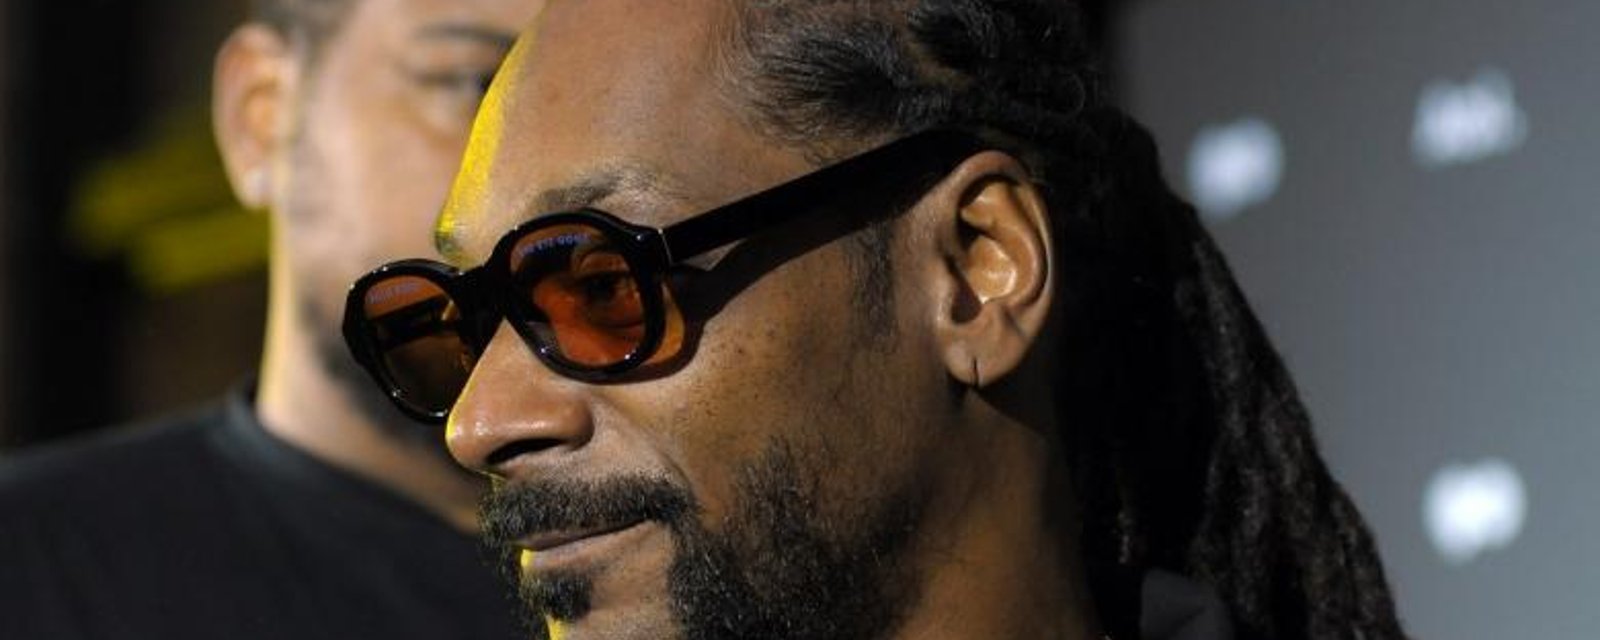 Snoop Dogg will go 1 on 1 against NHL star for charity.